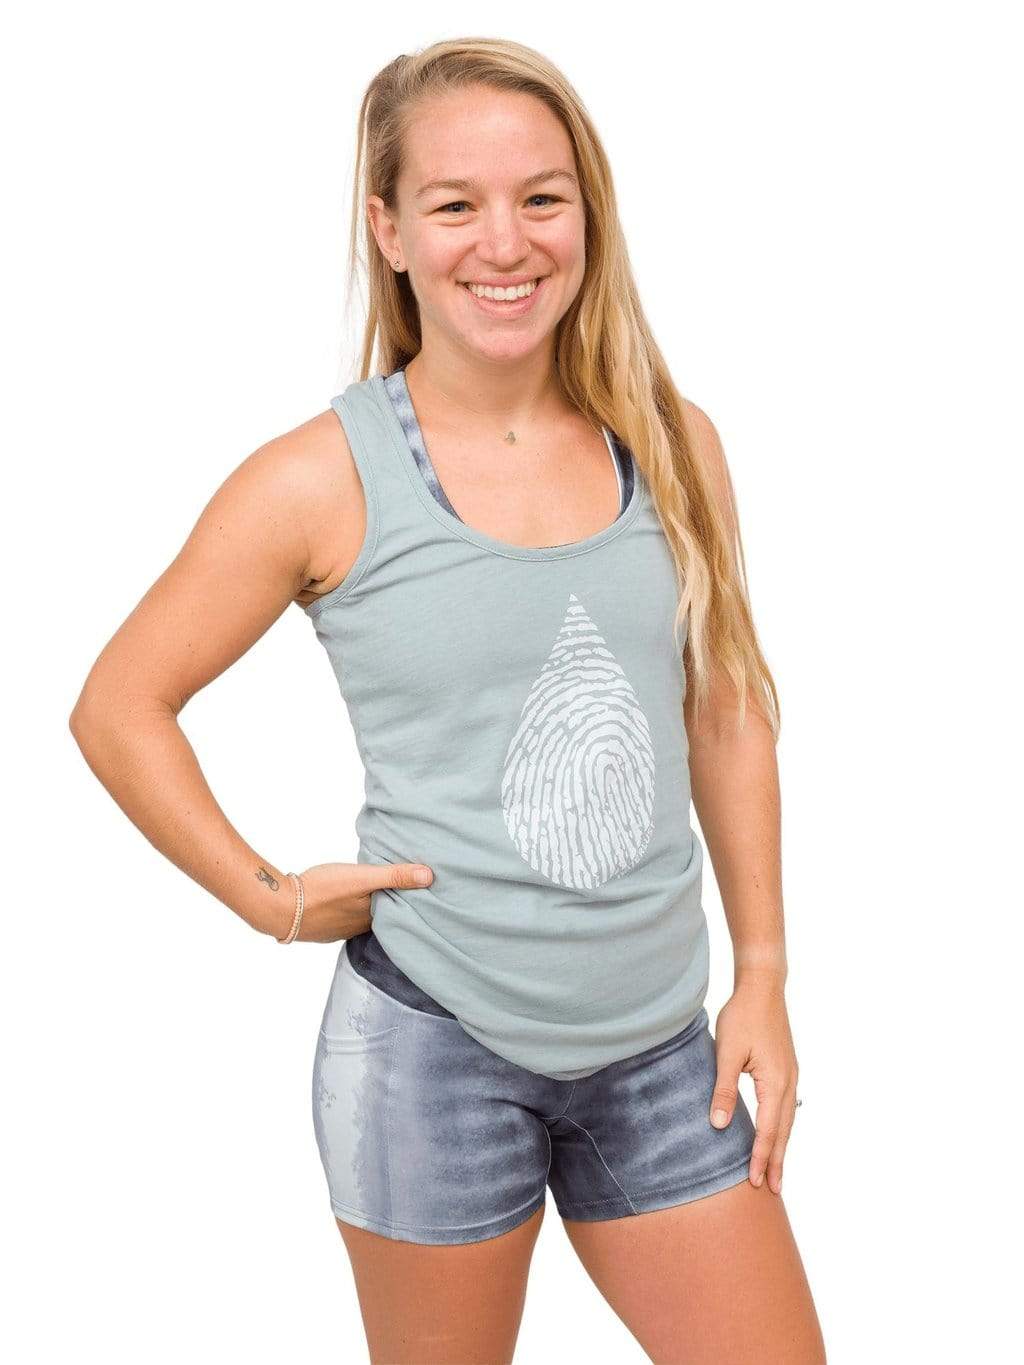 Model: Erin is a coral ecologist and Program Manager here at Waterlust. She 4&#39;11&quot;, 110 lbs, 32A and is wearing an XS short and XS tank.